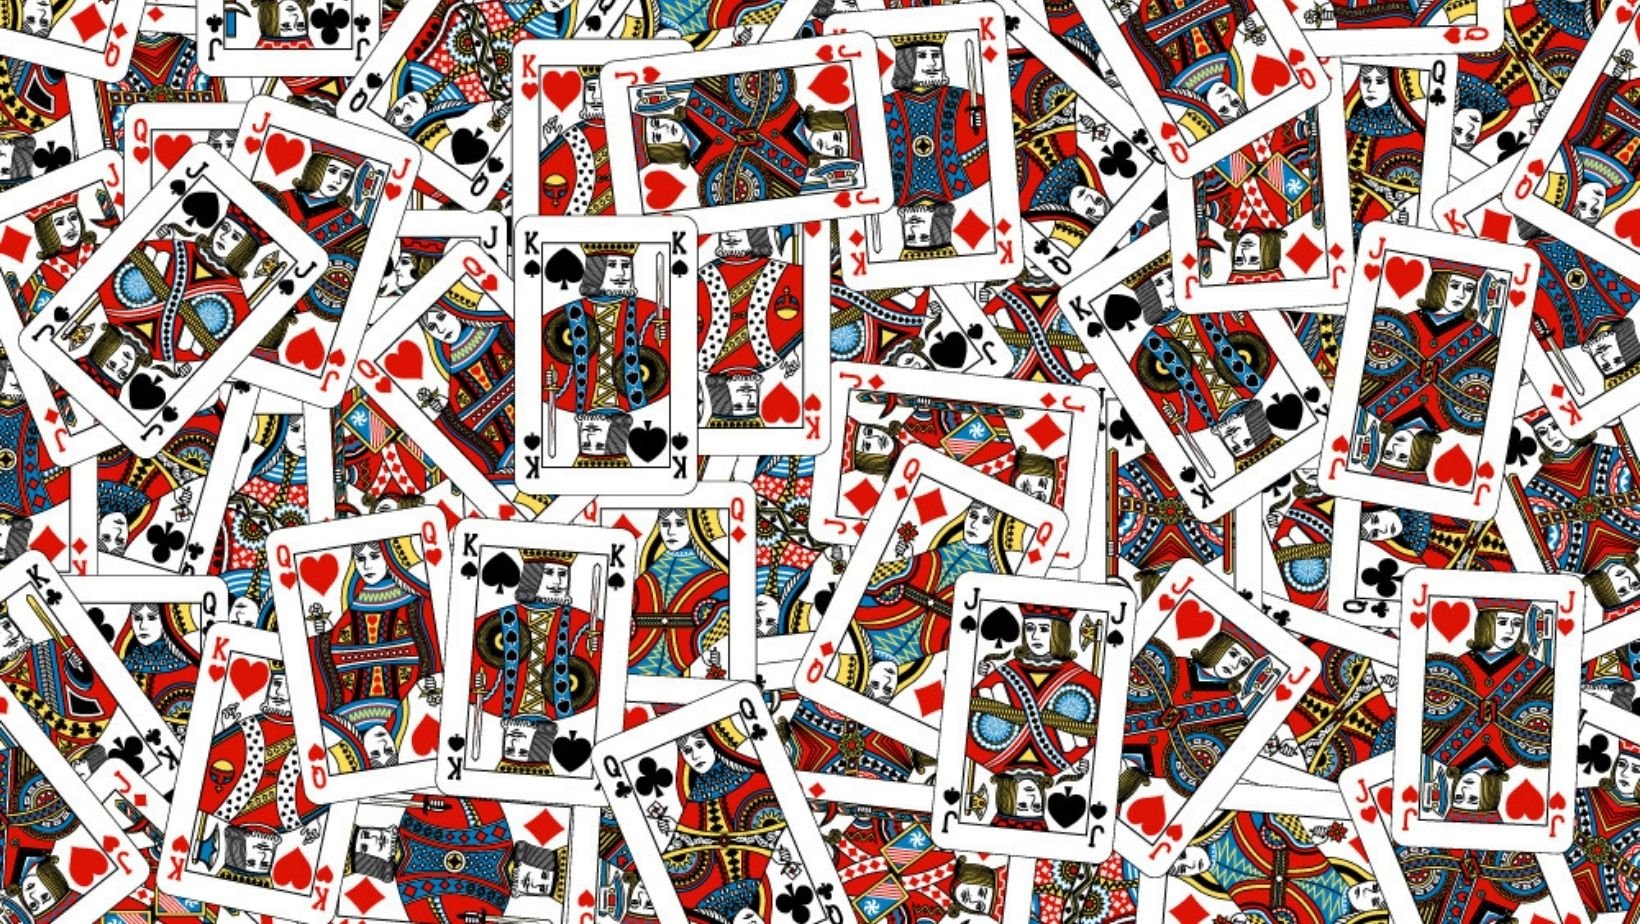 small joys thumbnail 1 8.jpg?resize=1200,630 - How Fast Can You Find The ONE-EYED JACK In This Deck?